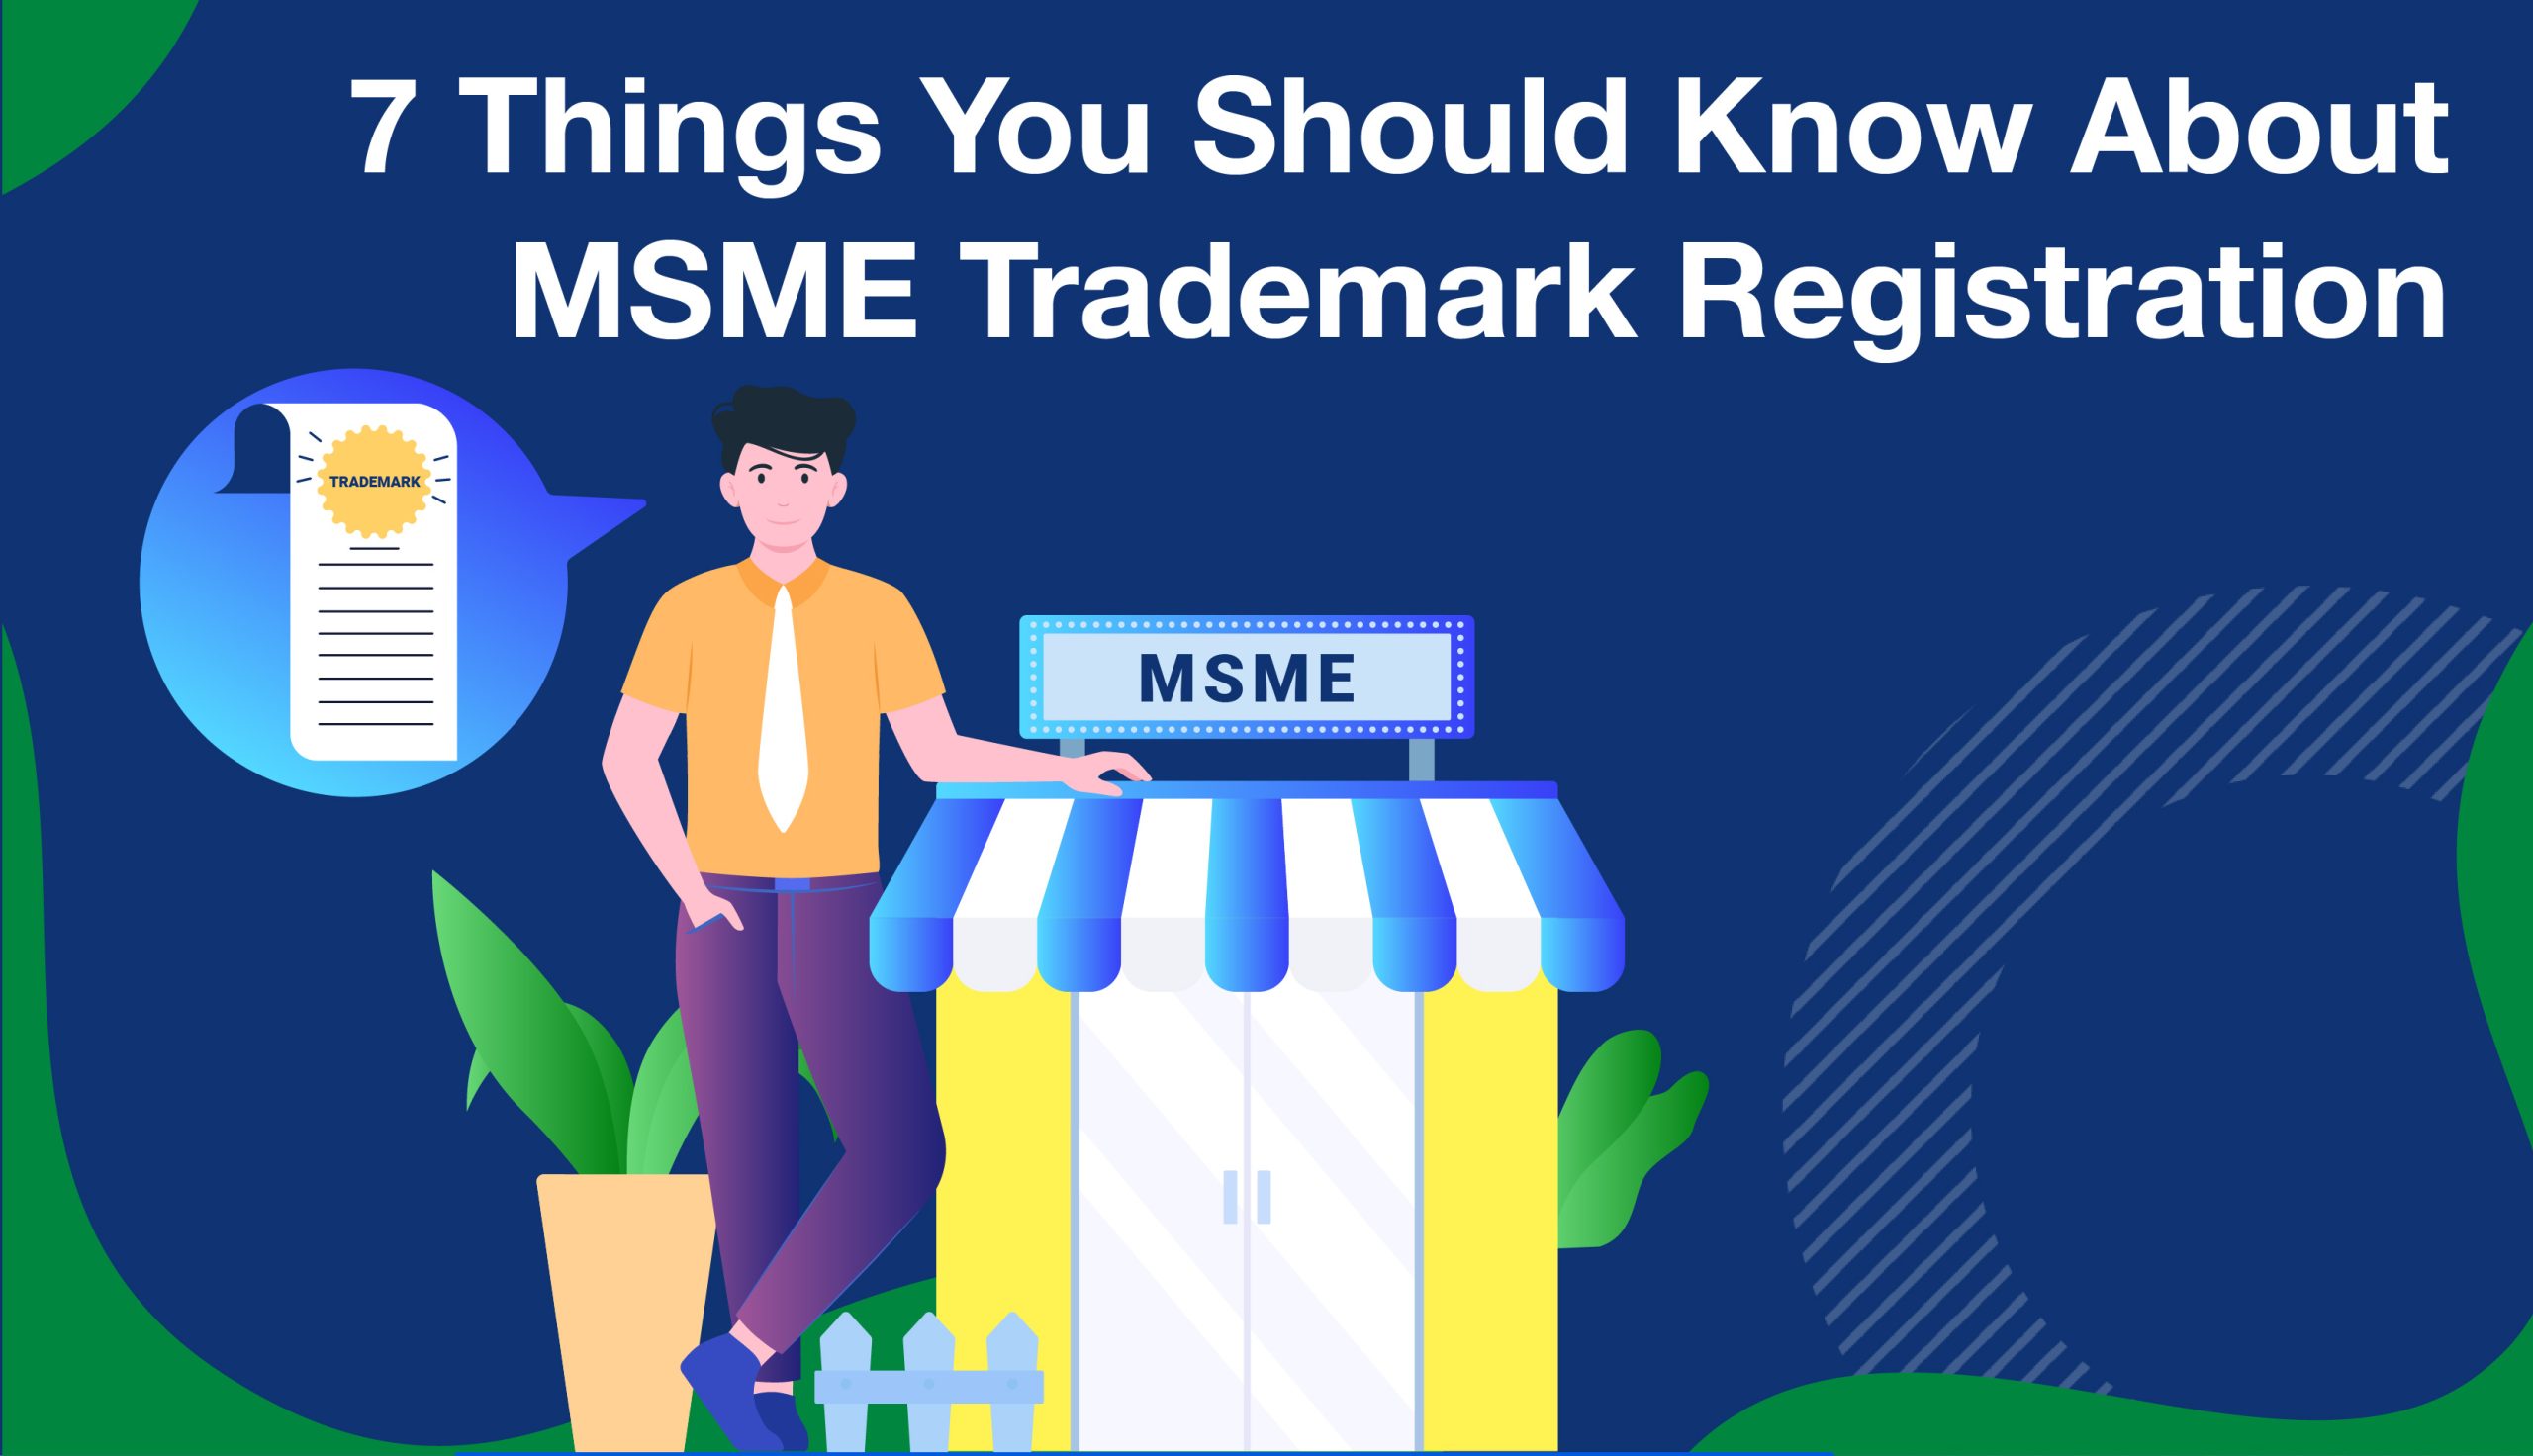 7 Things You Should Know About MSME Trademark Registration